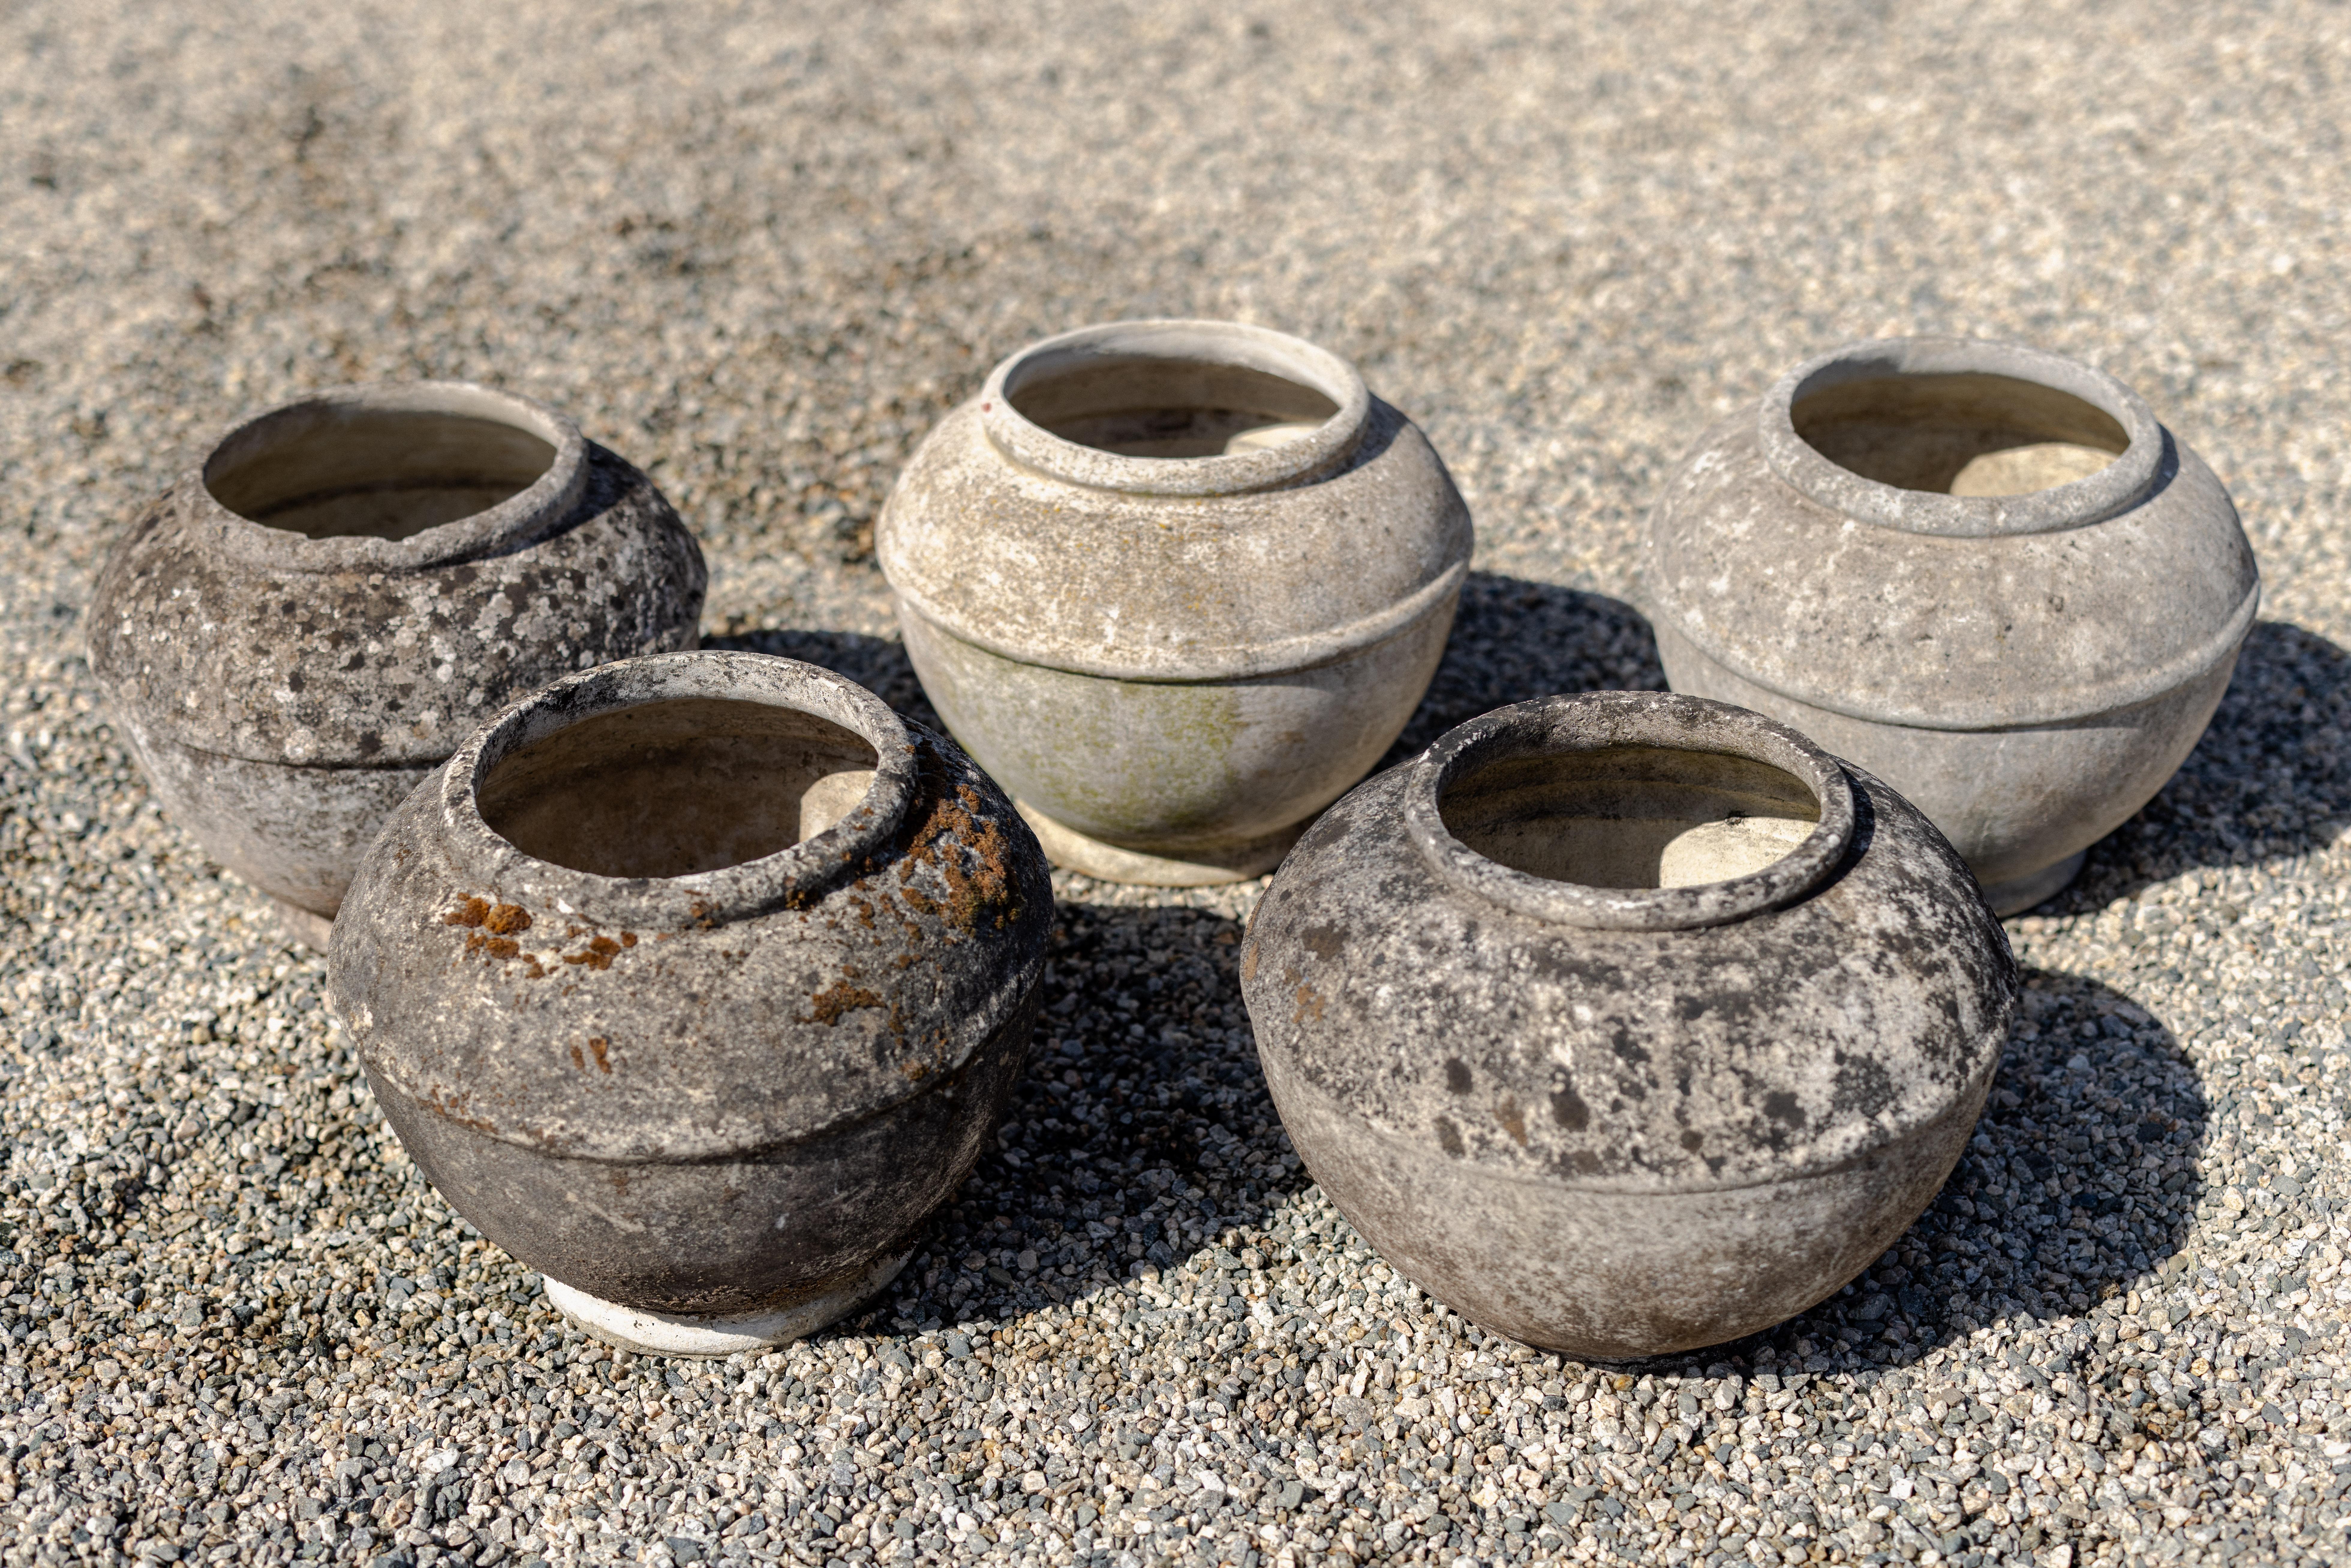 A Collection of Concrete Vases by Willy Guhl, 1960's, Switzerland

H 12